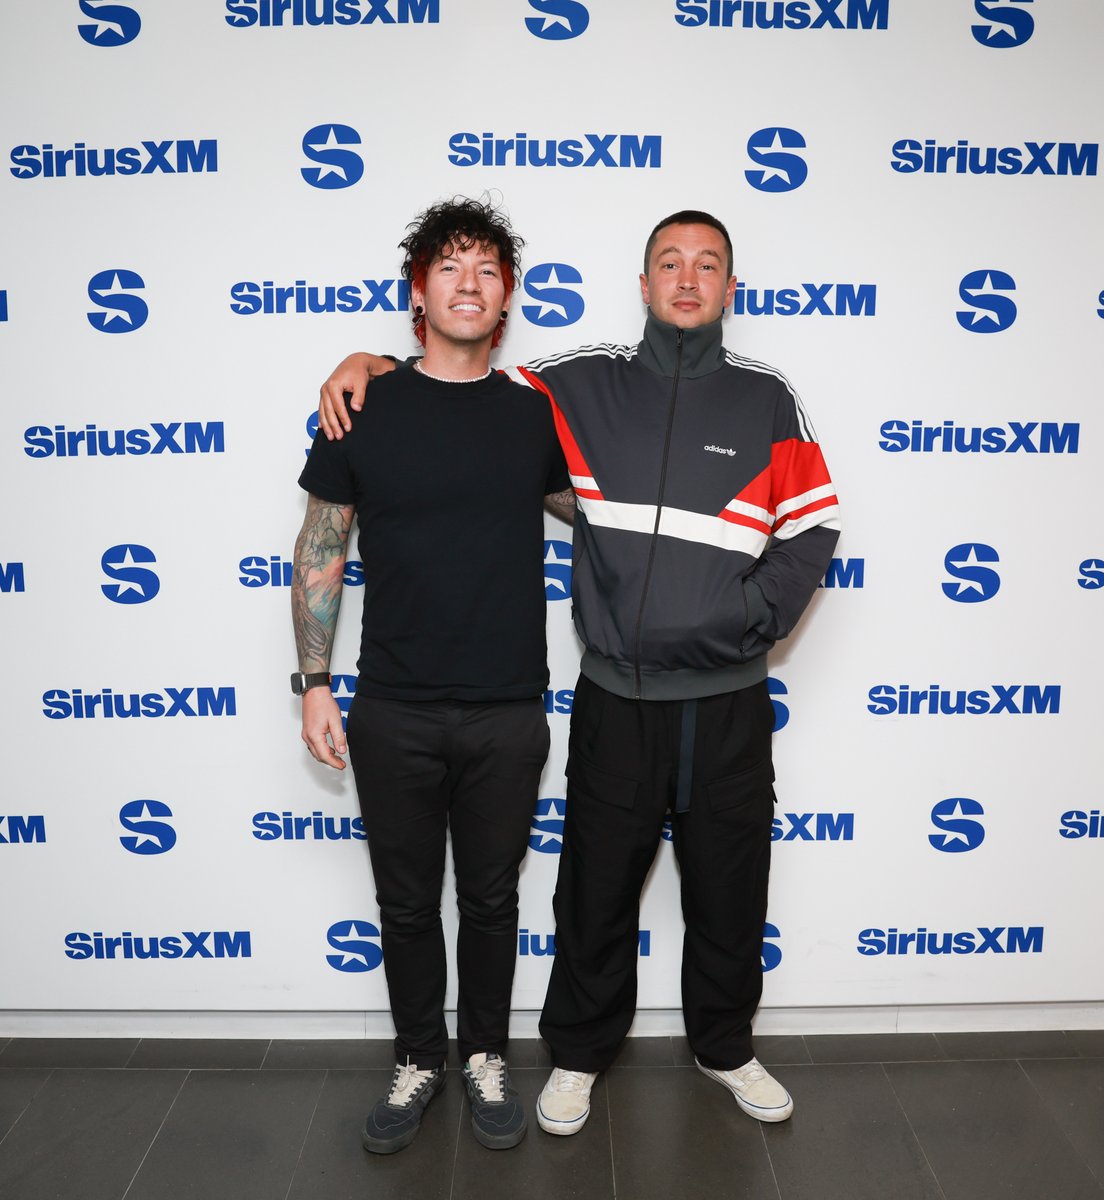 'I wear all black, so in order to feel exciting, all the stuff underneath the clothes I do the color.' -@joshuadun
'Everything underneath is popping.' -@tylerrjoseph 

Listen to @twentyonepilots answer a question from @DUALIPA, now on the SiriusXM app: sxm.app.link/twentyonepilot…